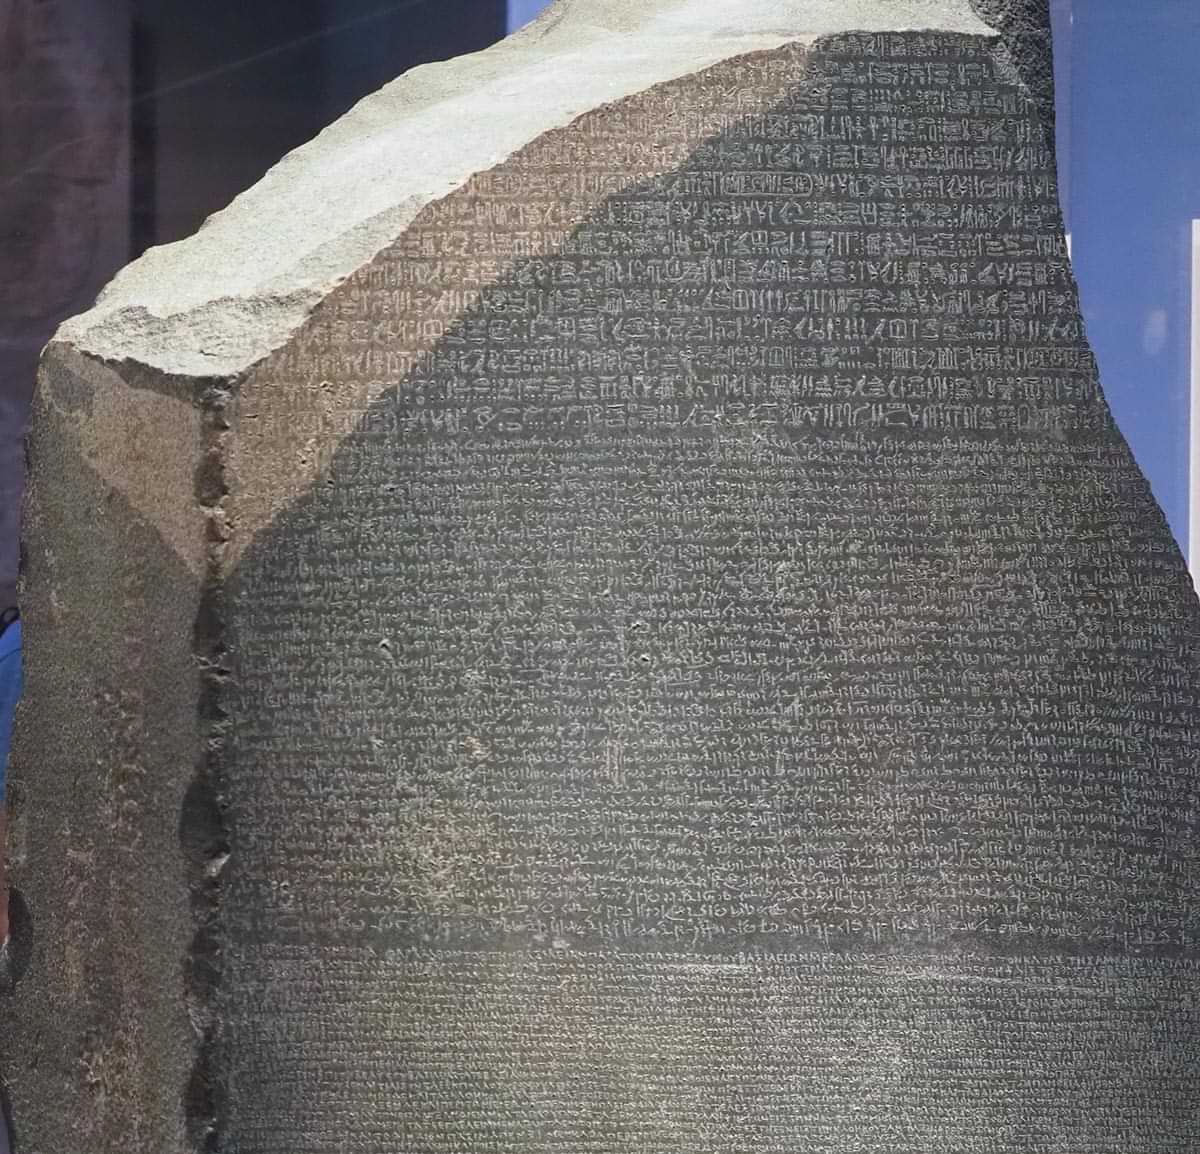 close up of the Rosetta Stone stele at the British Museum with text in Ancient Egyptian hieroglyphic, Demotic scripts and Ancient Greek